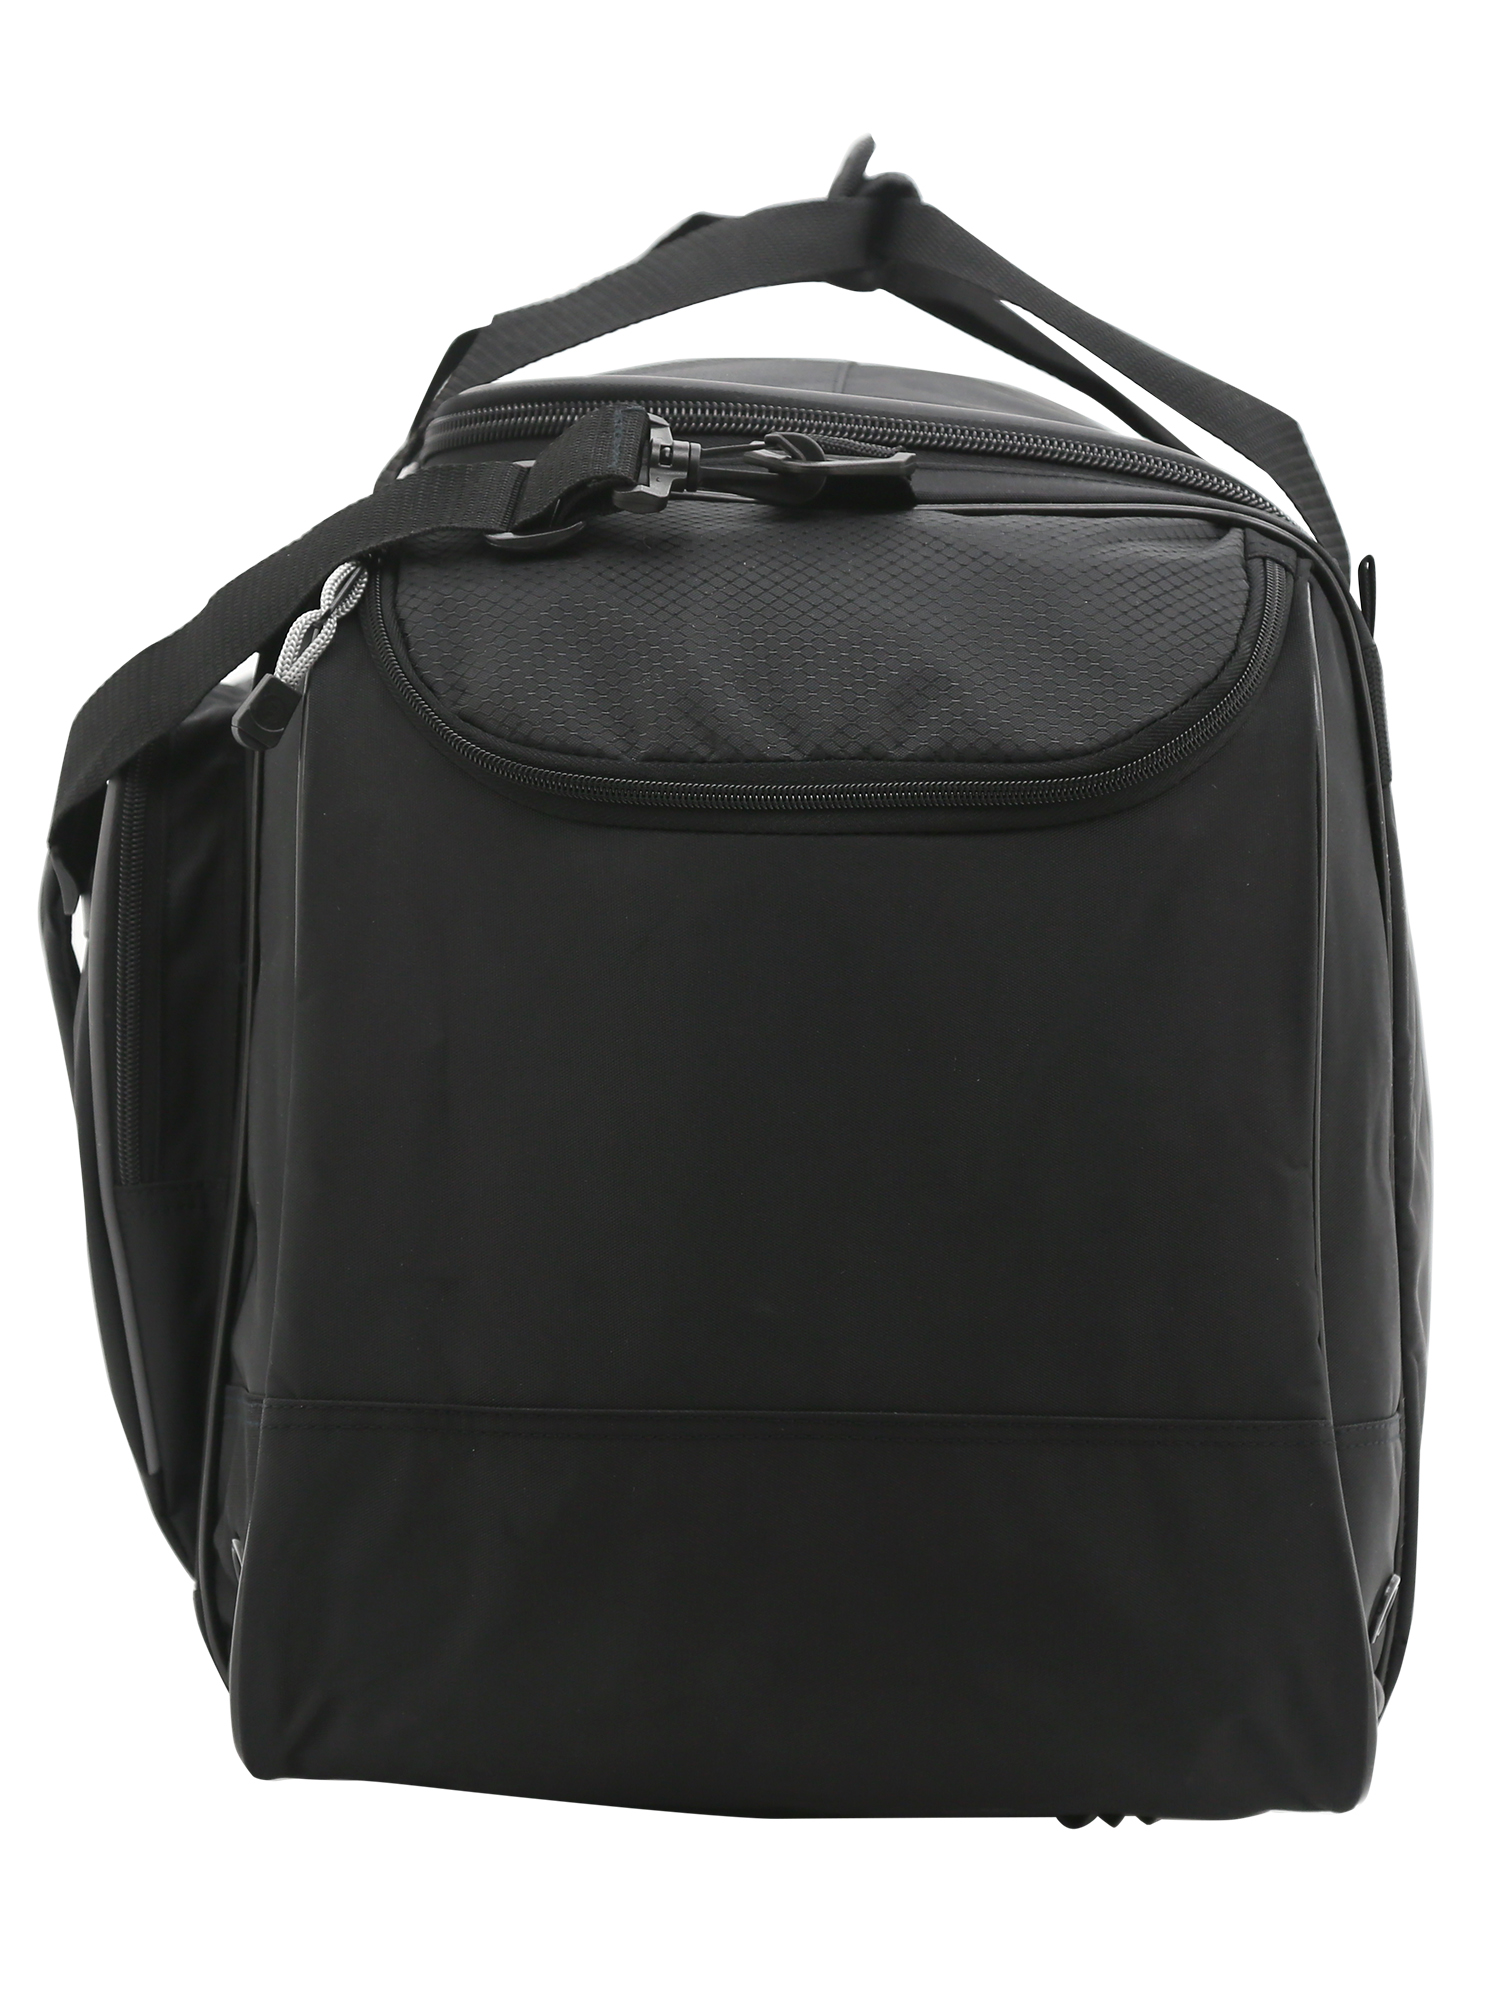 Protégé 28" Polyester Sport and Travel Duffel Bag, Black - image 4 of 6